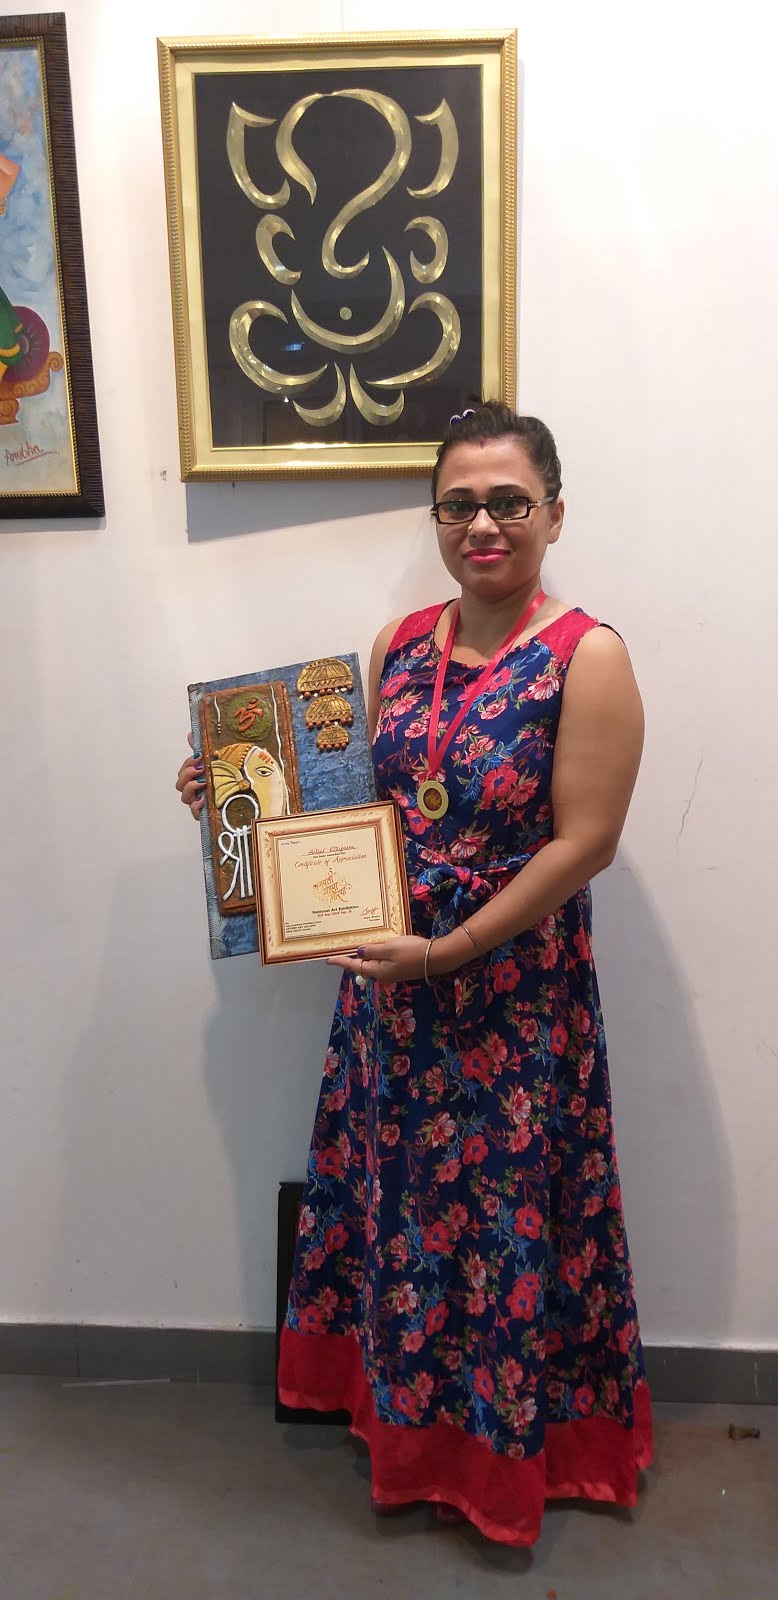 Certified and getting medal for first exhibite my paintings at Artizen Art Gallery